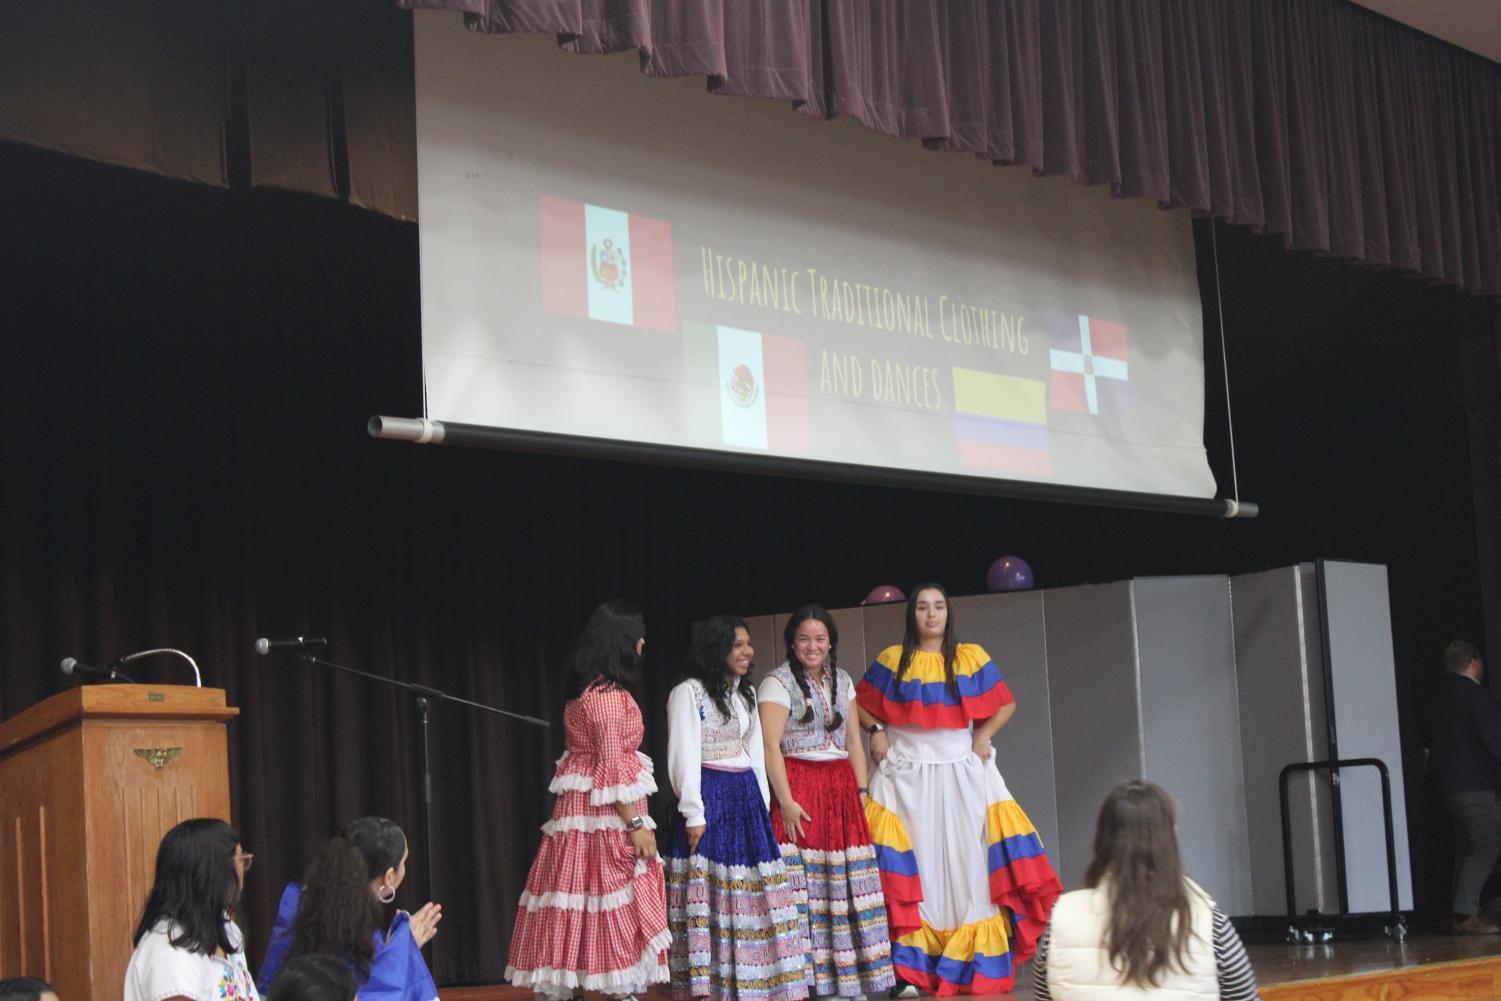 Students presenting on the stage for the Hispanic Heritage month.